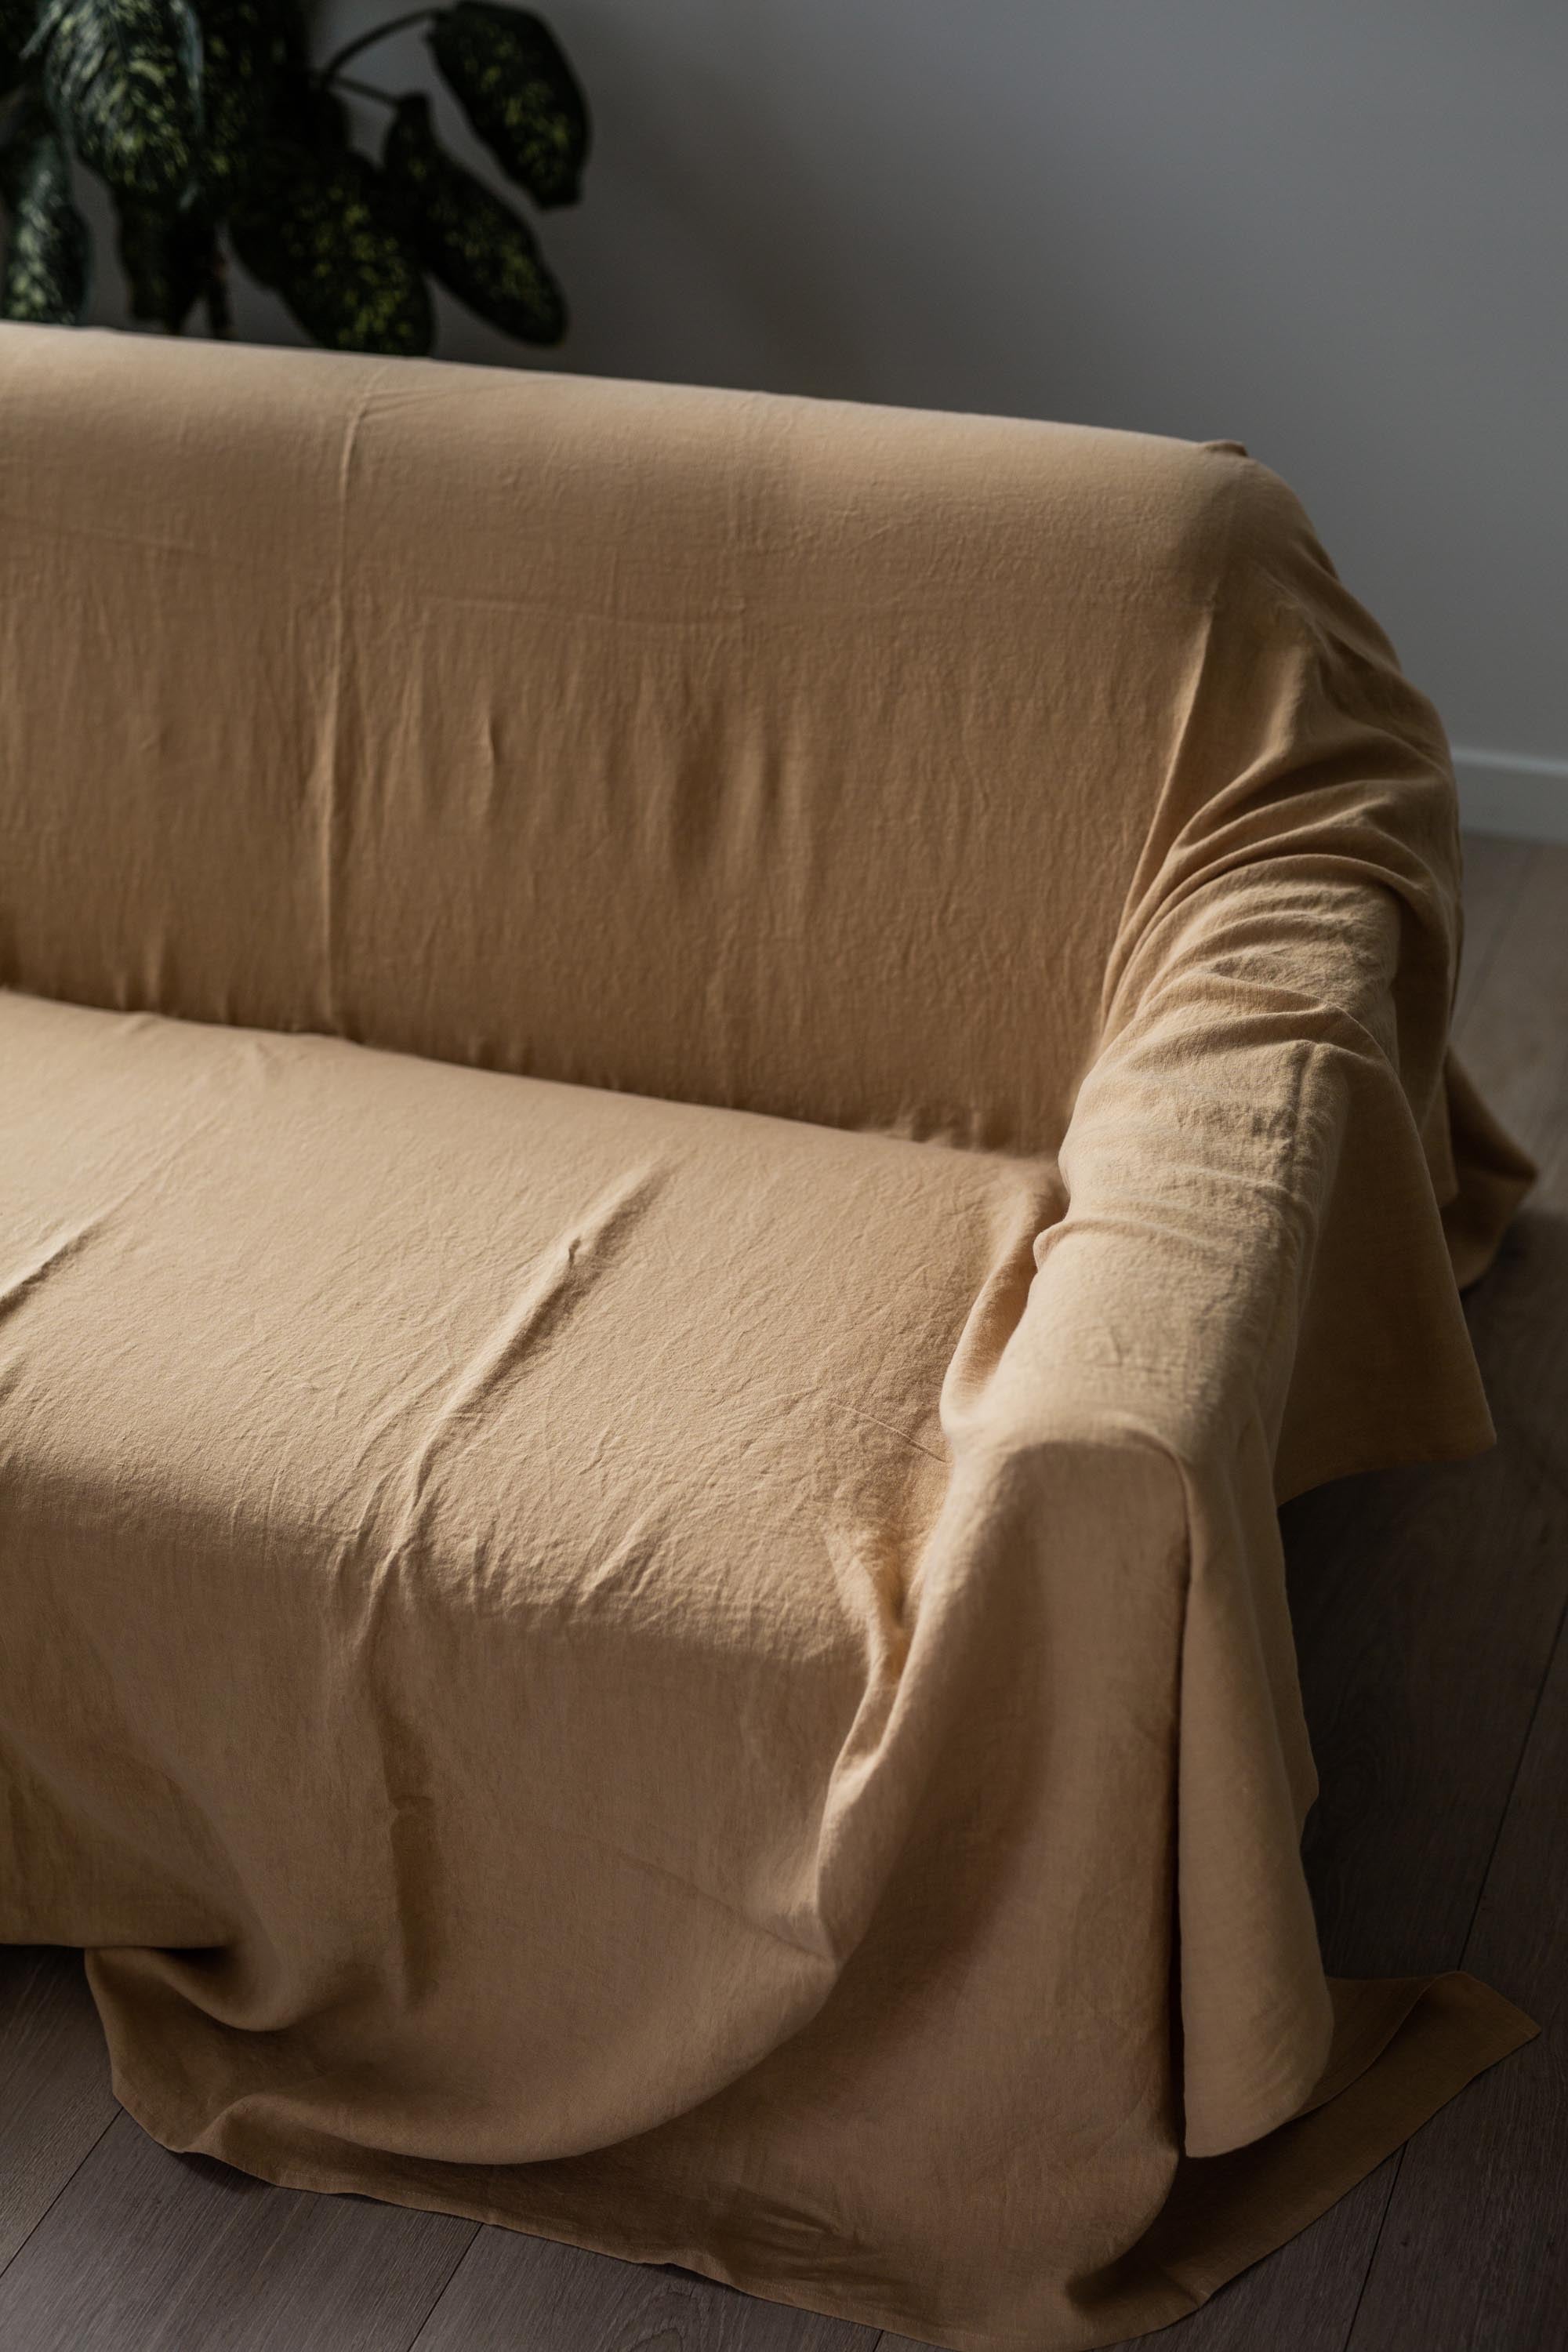 Couch Covered With Lined Flat Sheet In Mustard BY AmourLInen